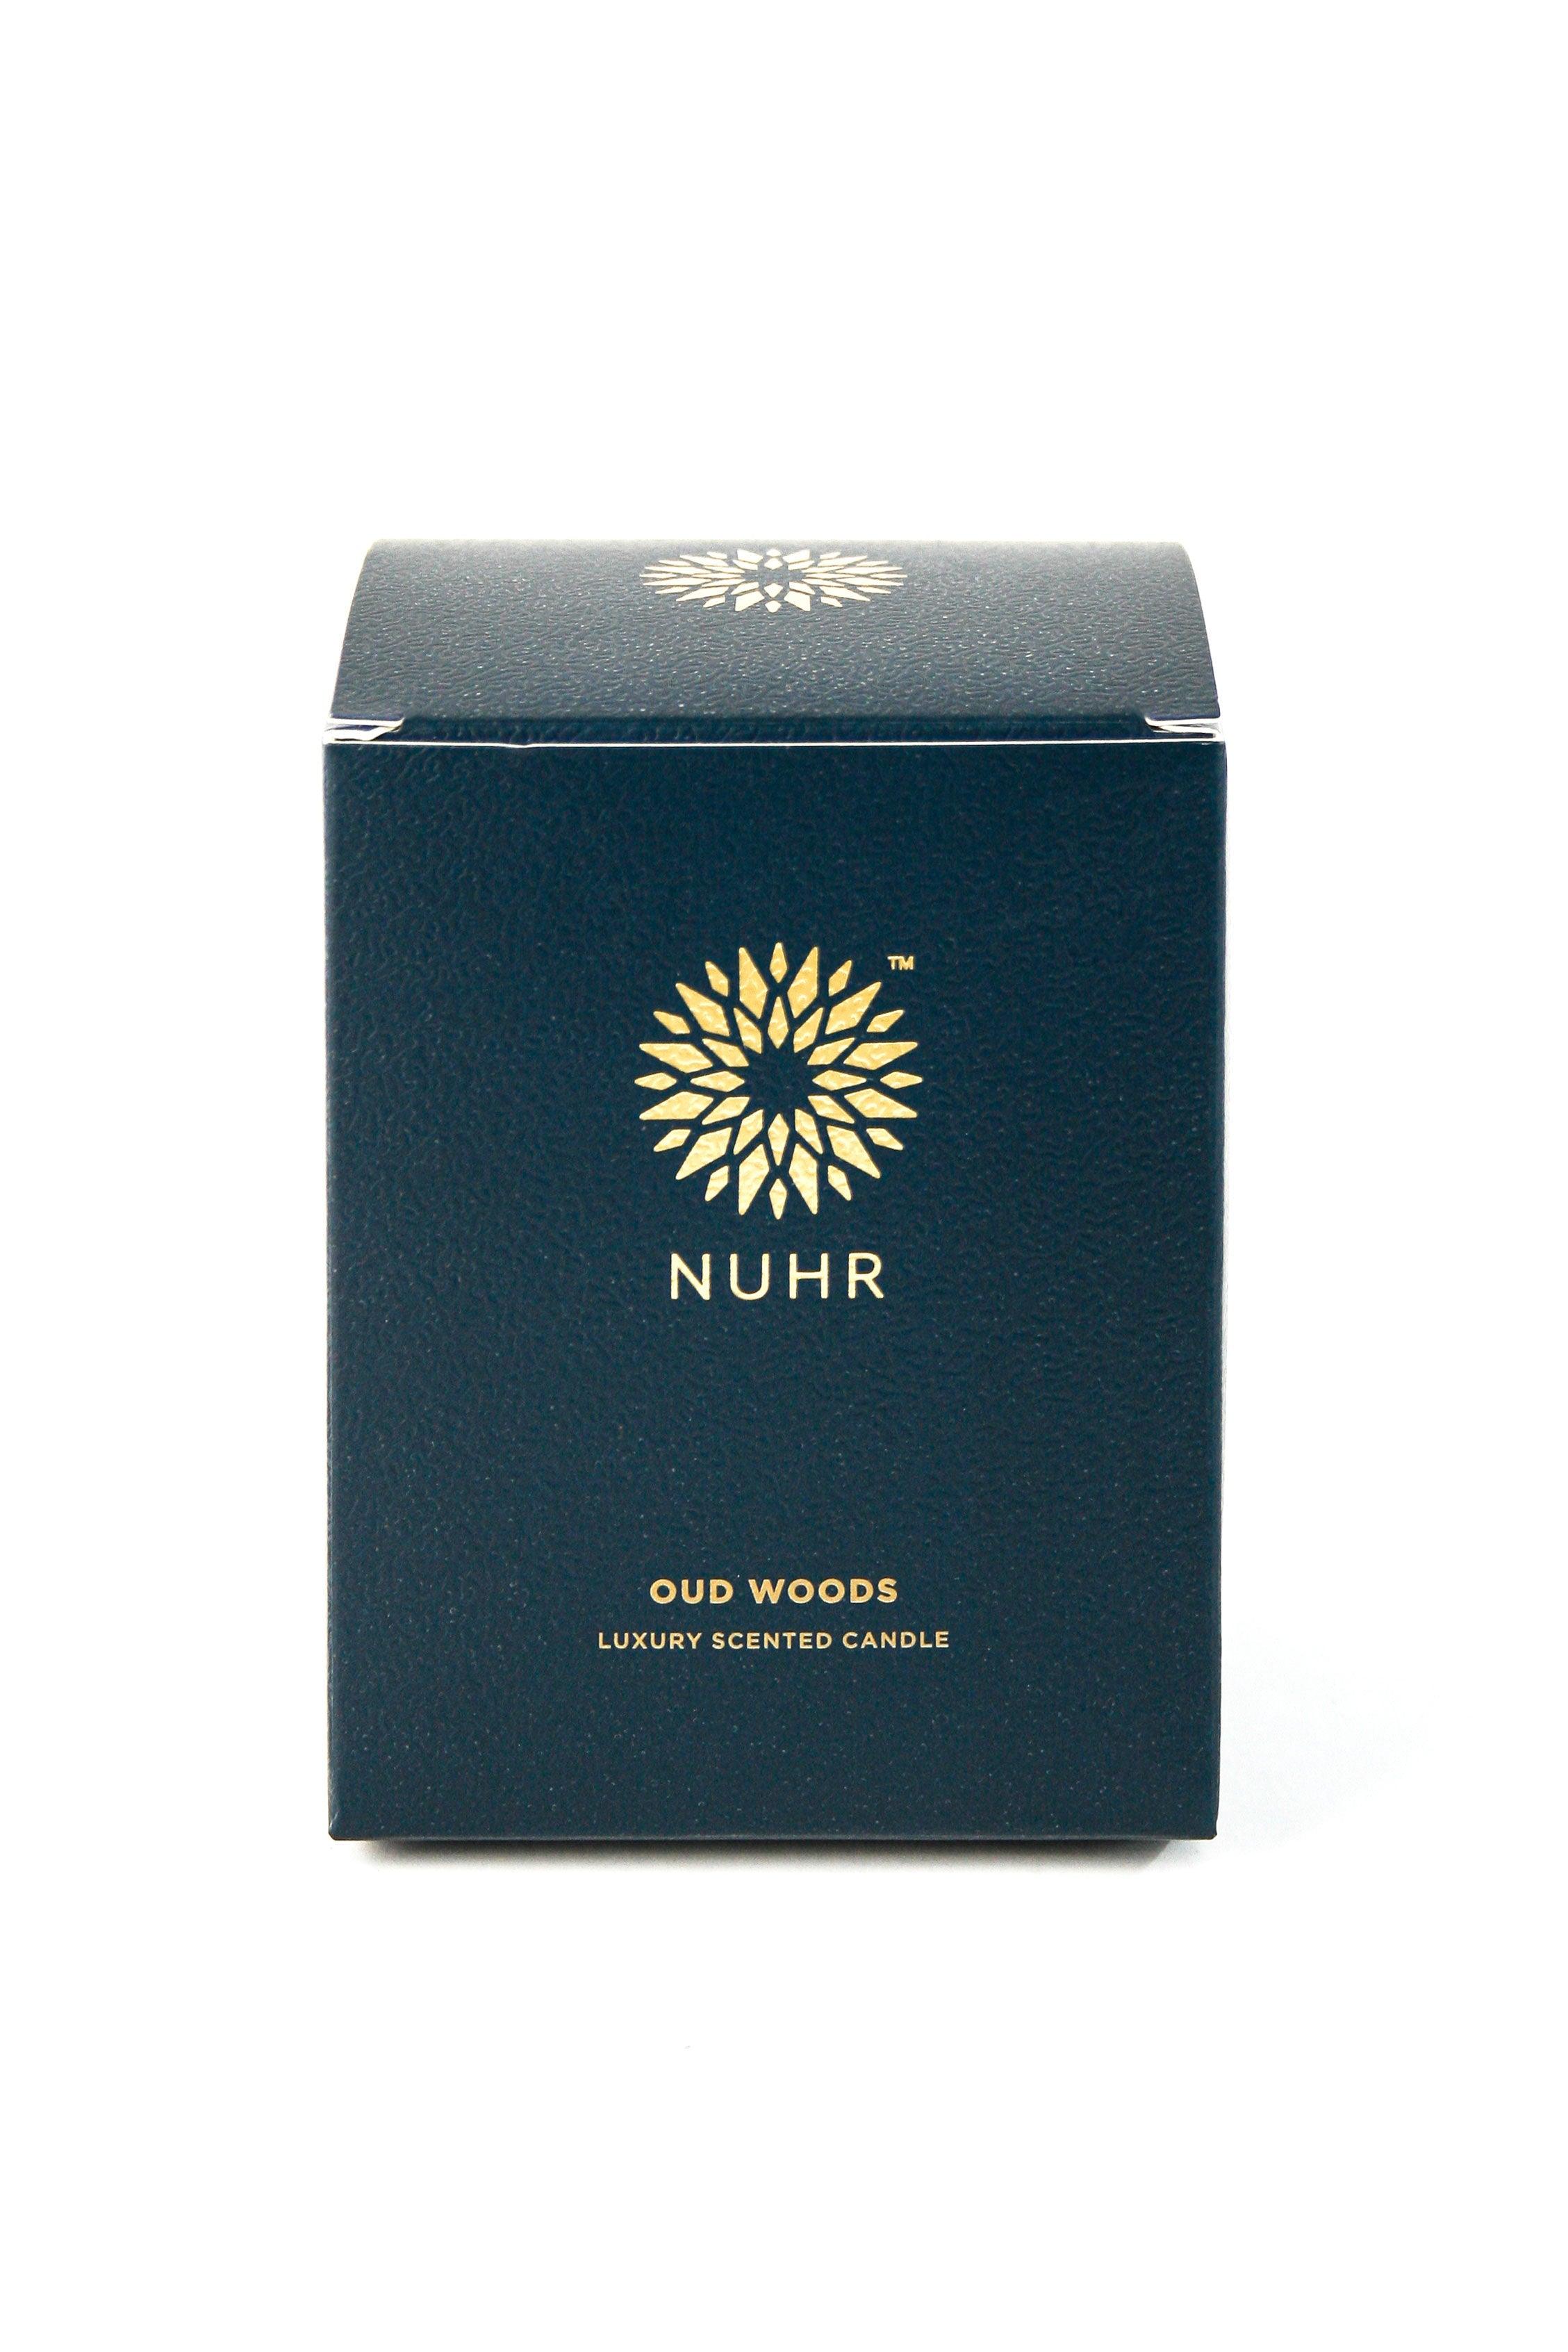 Oud Woods Luxury Scented Candle - Islamic Pixels